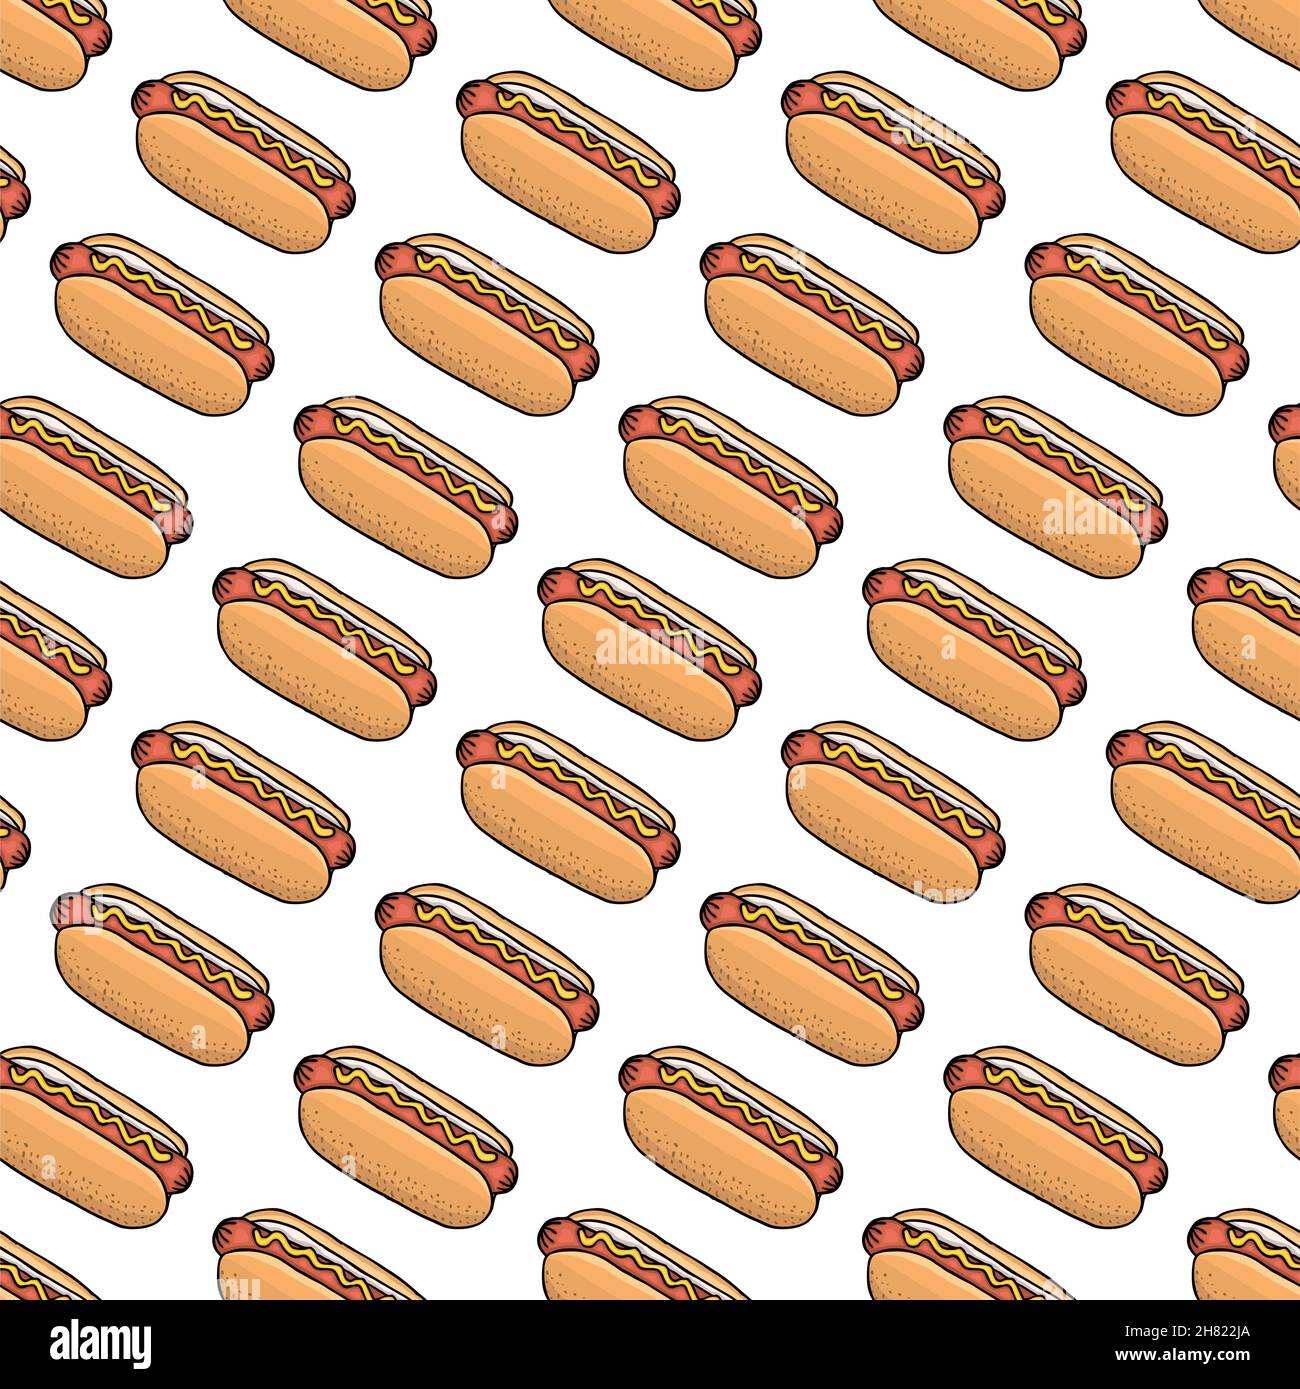 Seamless pattern of hot dogs, vector illustration. Stock Vector